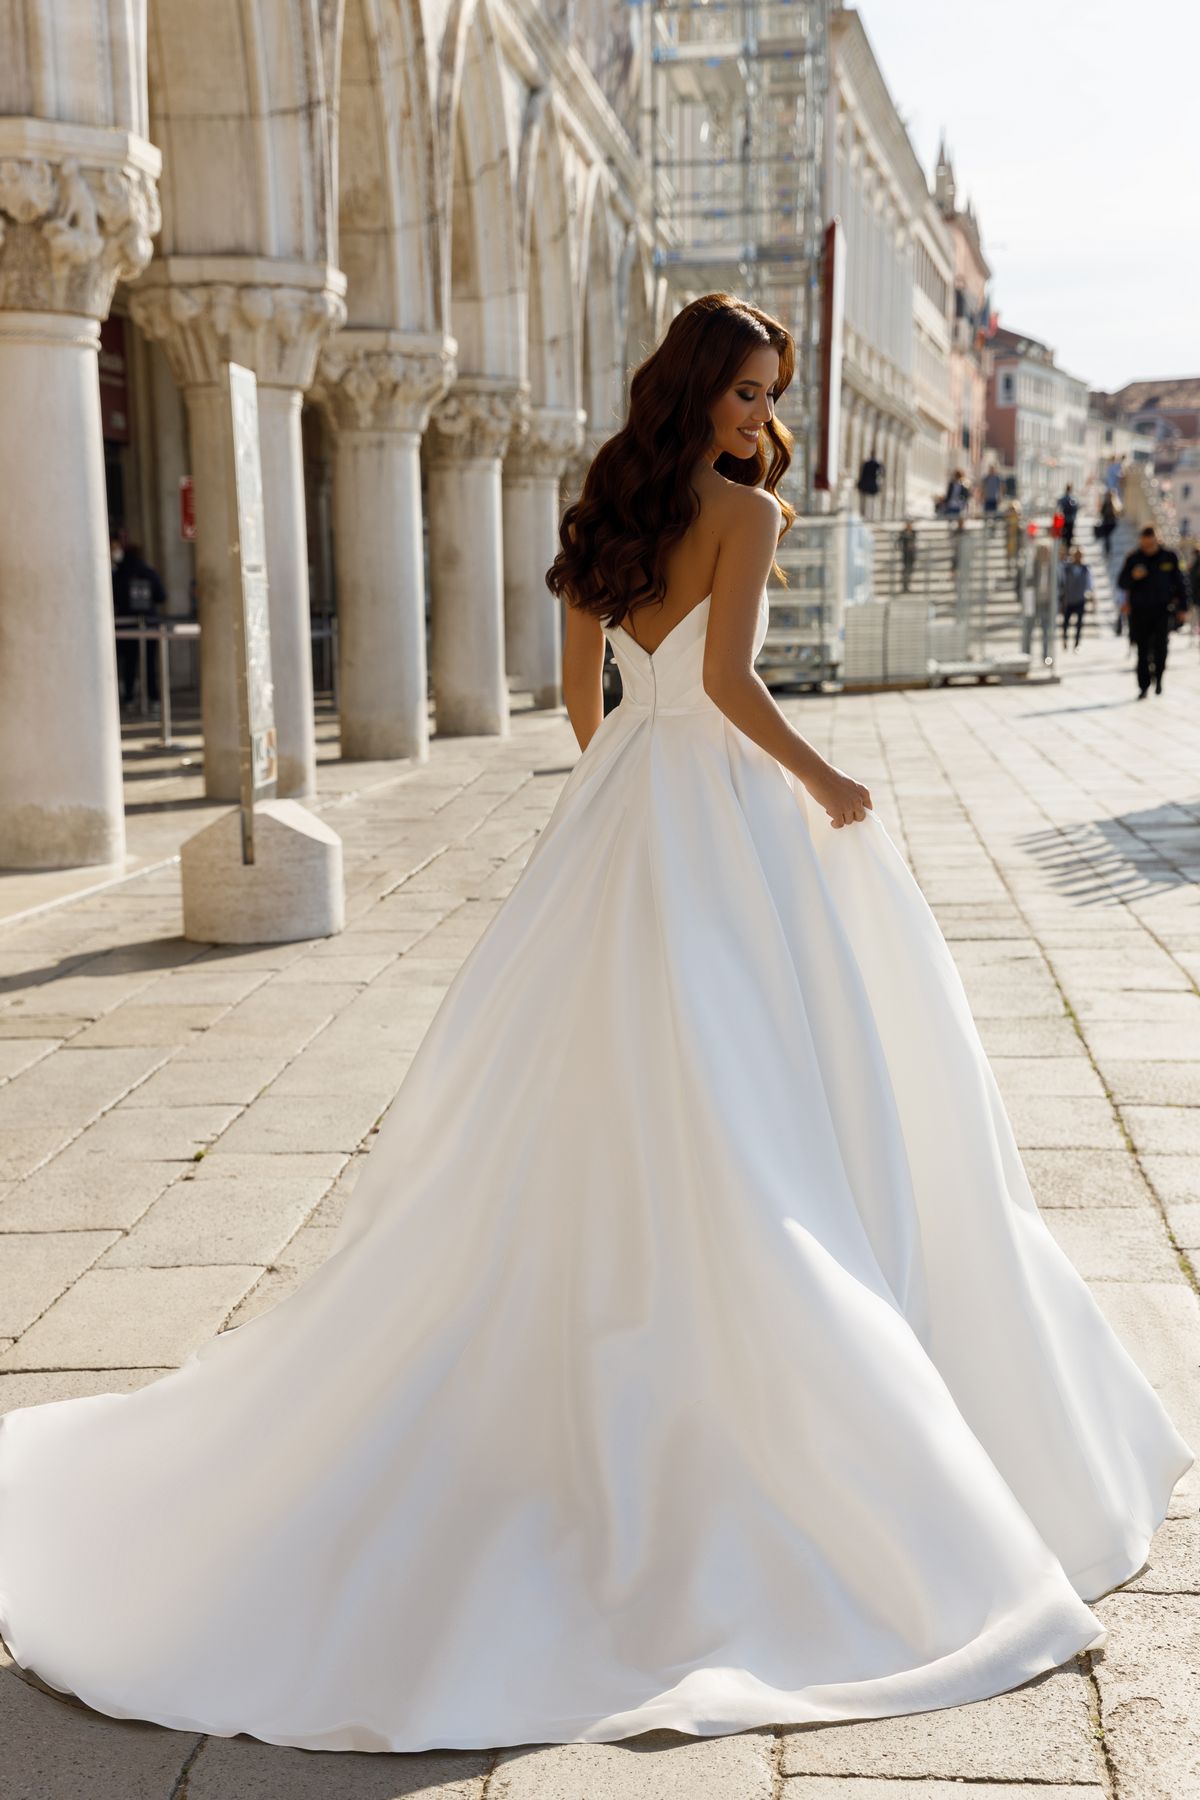 Satin Princess silhouette Victoria wedding dress by Oksana Mukha with a slit on the left side at Dell'Amore Bridal, Auckland, NZ. 6